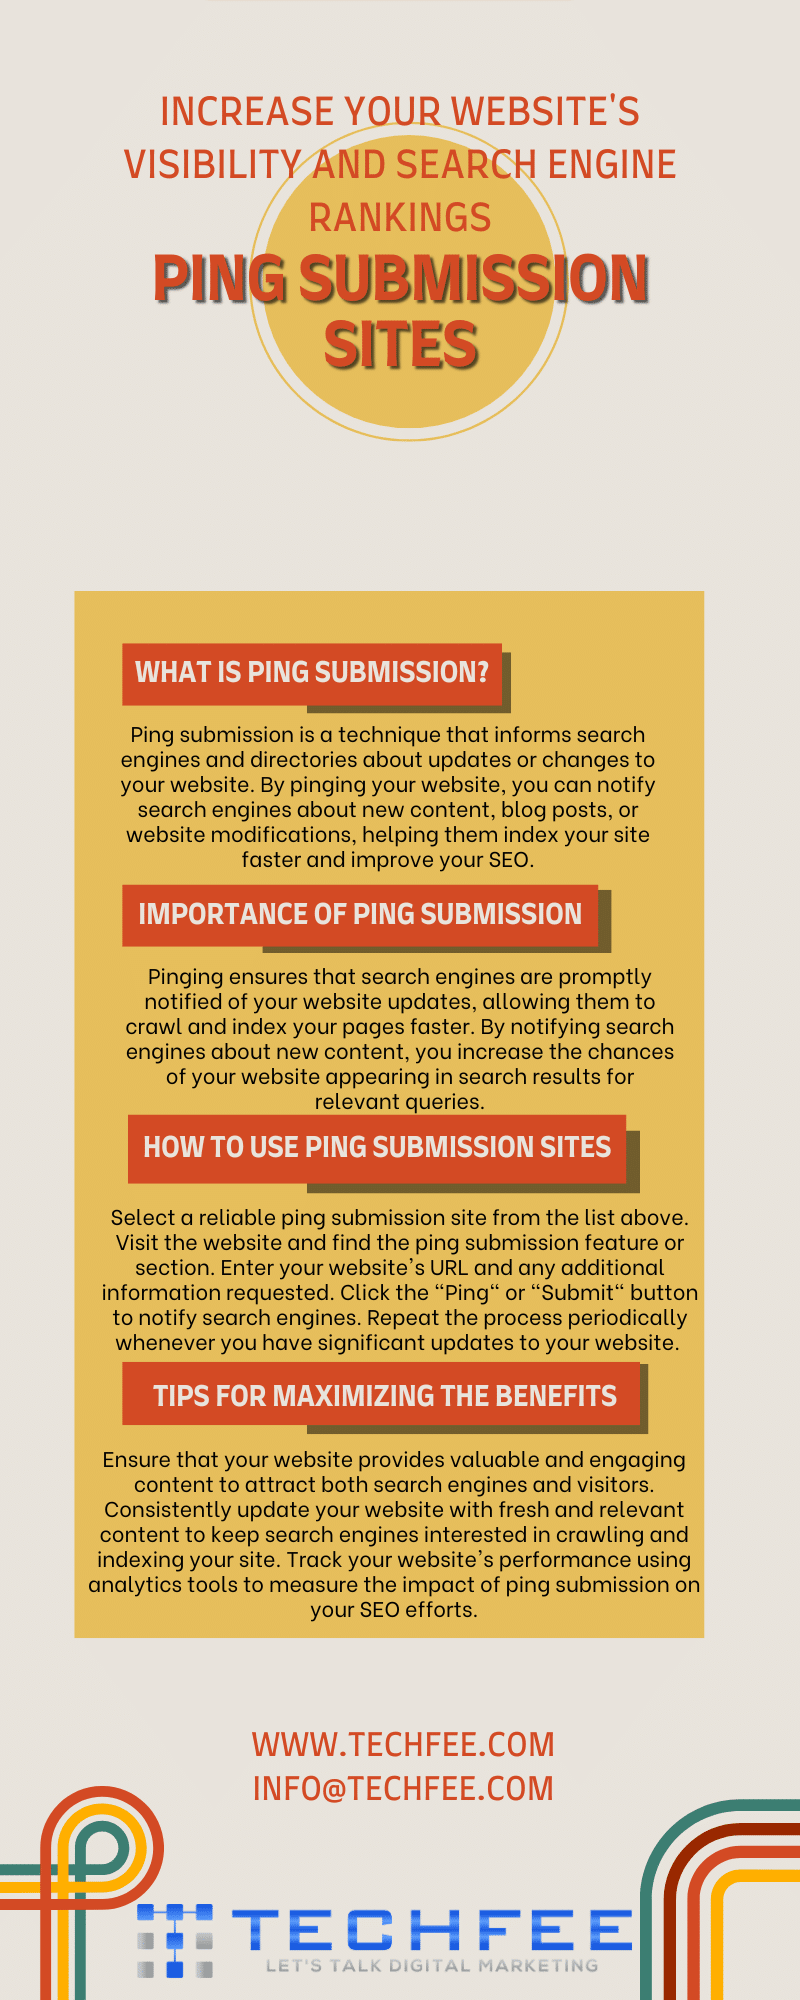 ping-submission-sites-infographics-by-techfee